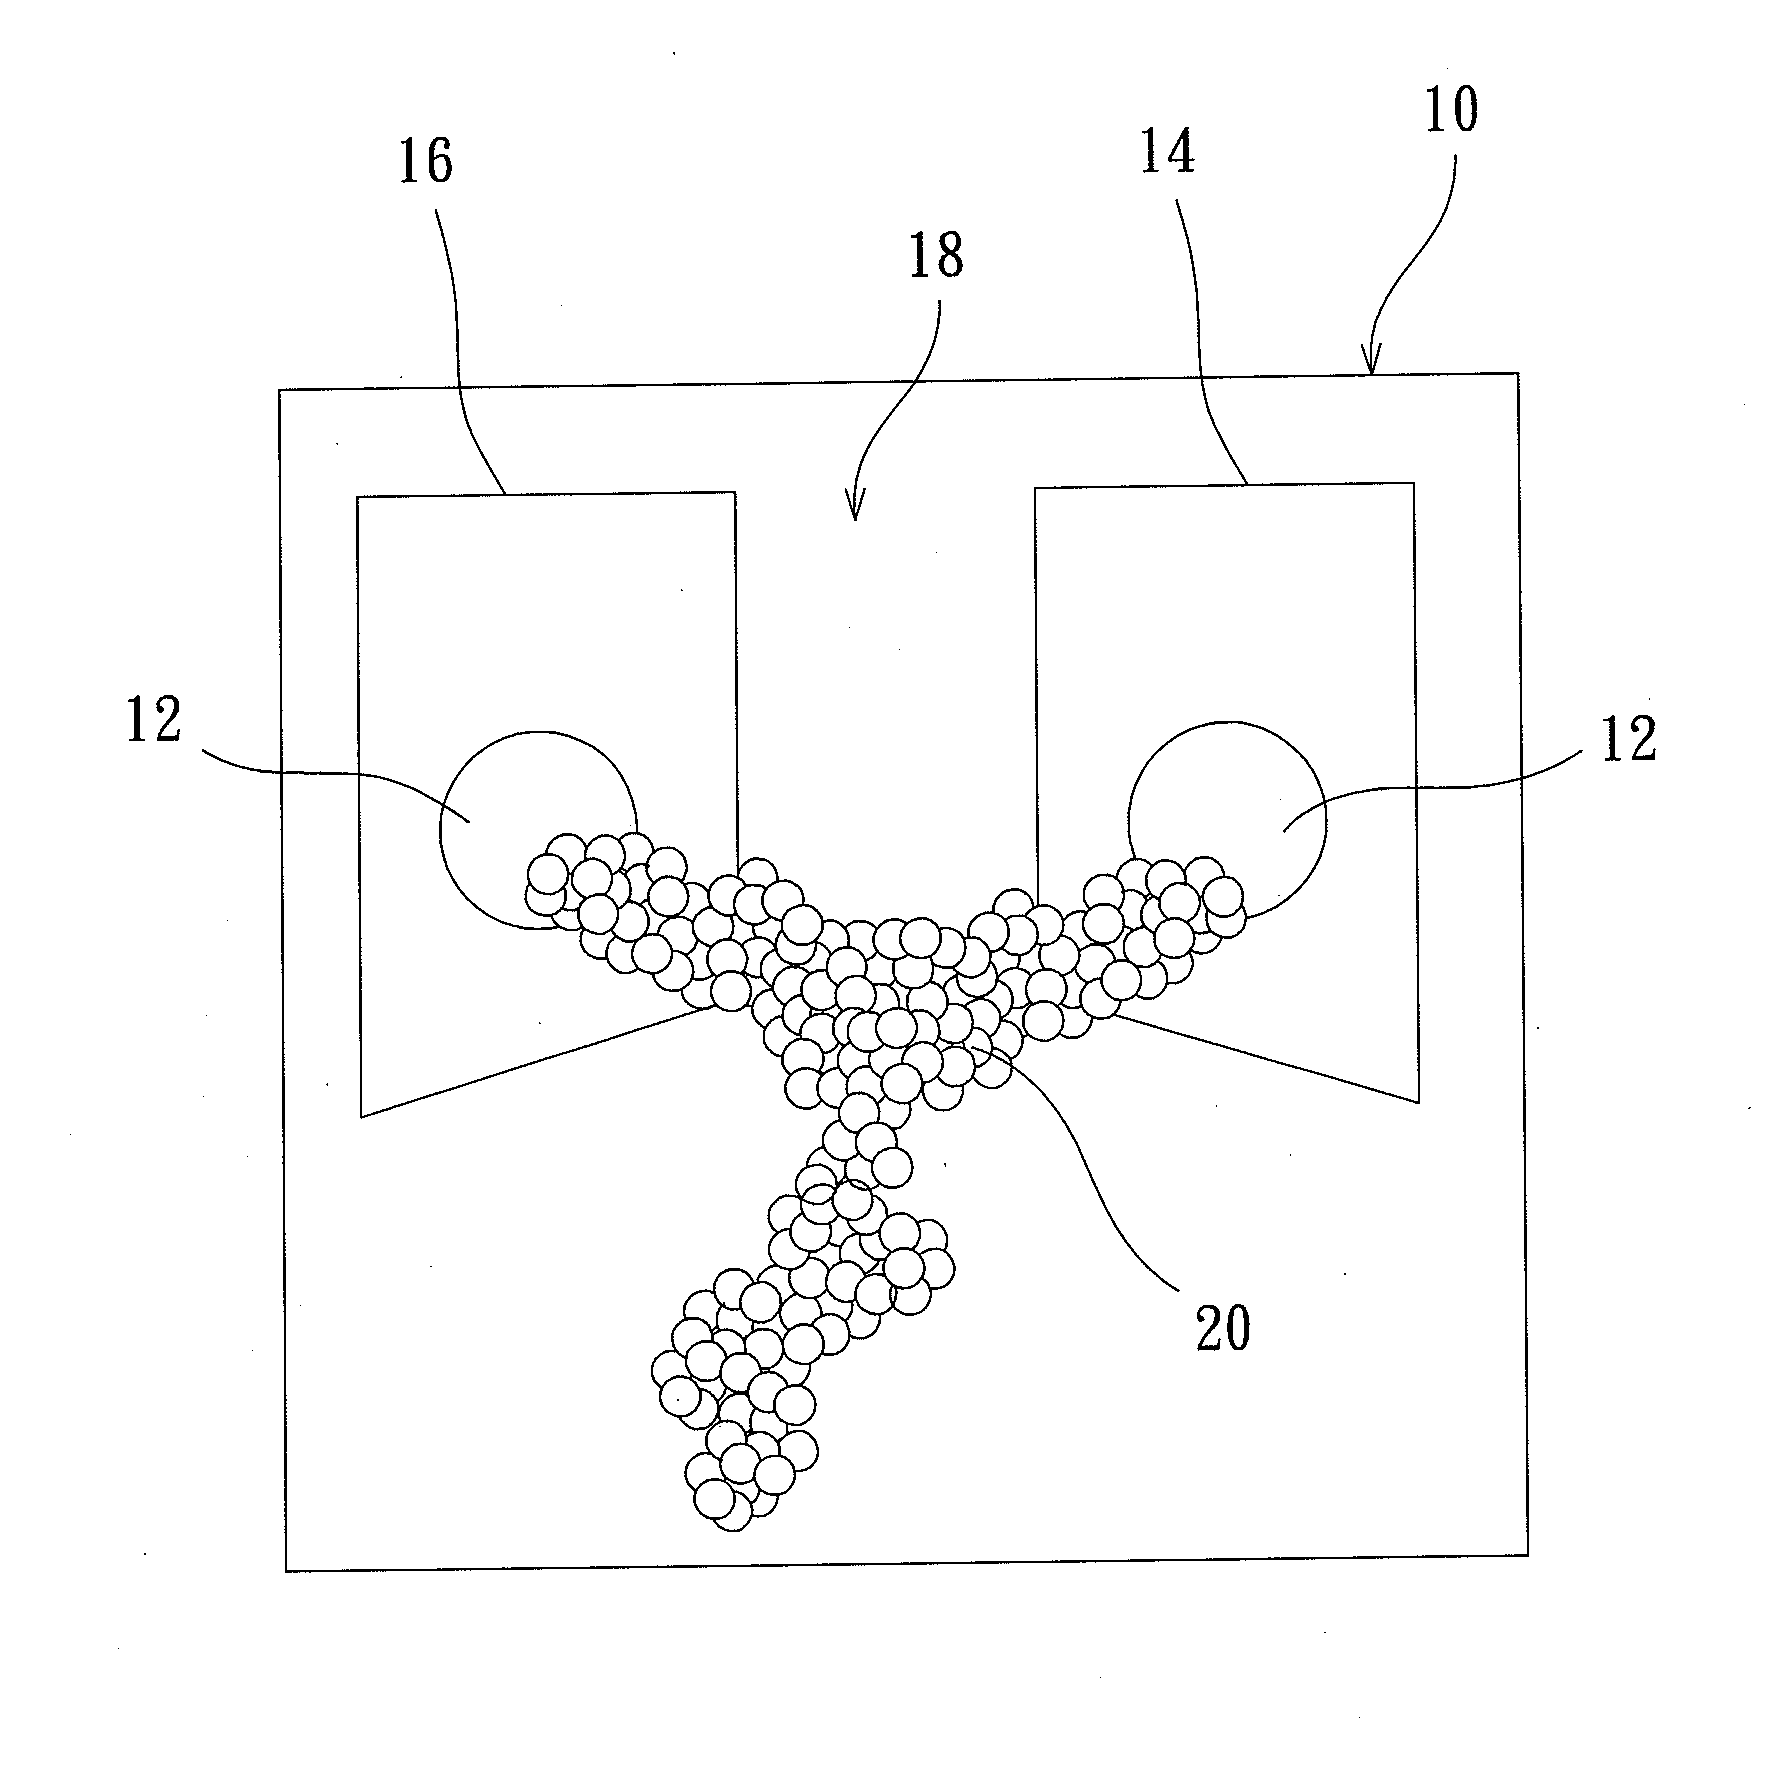 Protein transistor device